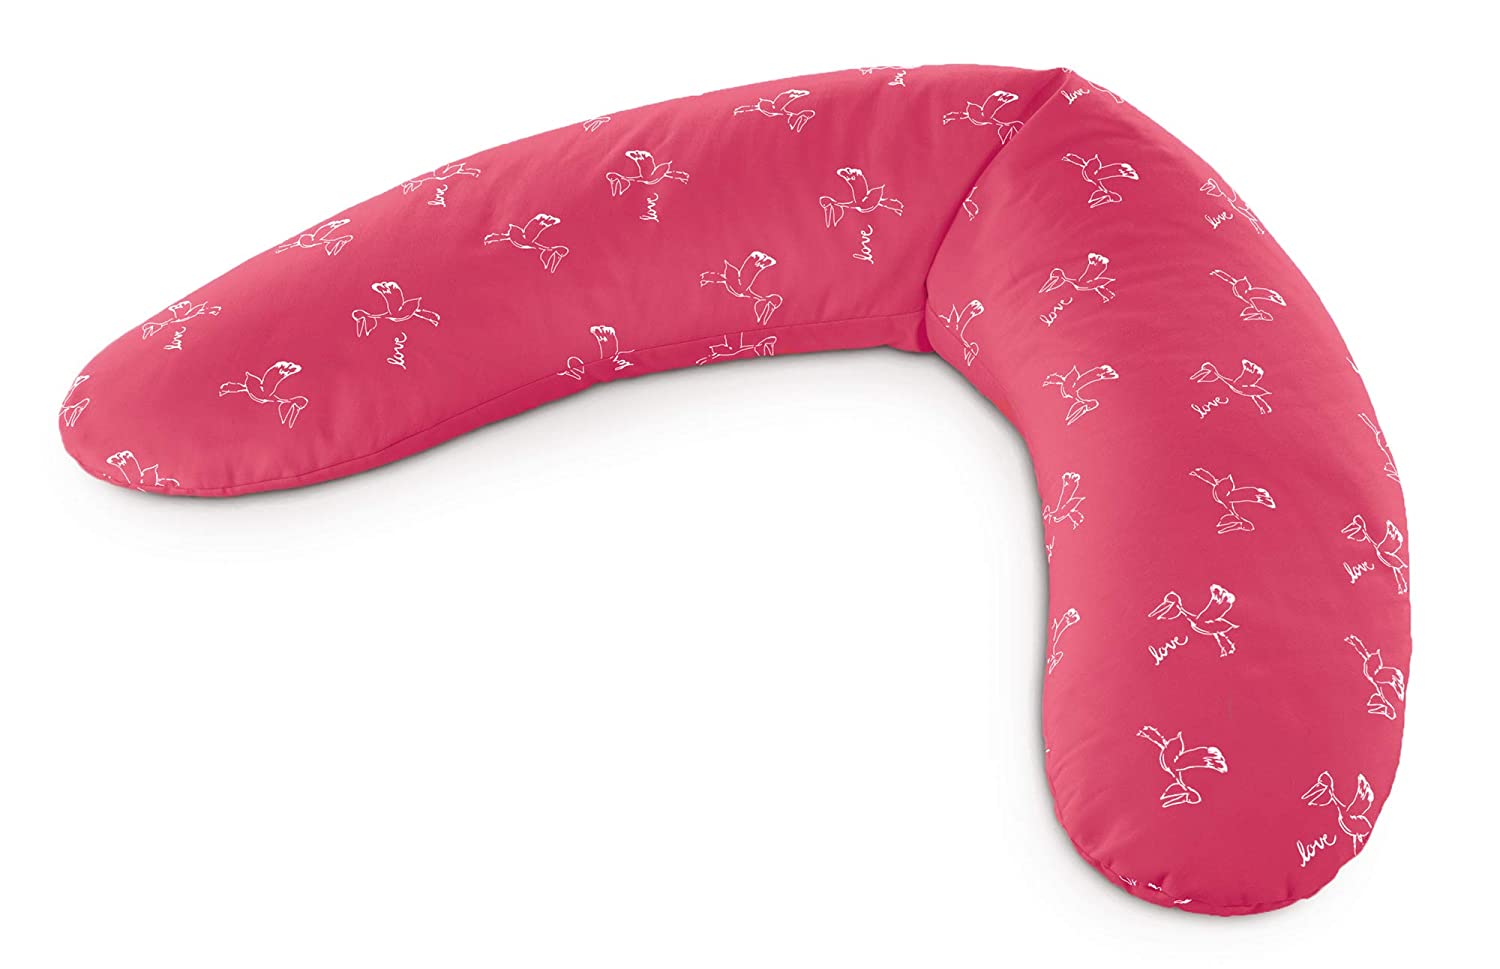 Theraline Dodo Pregnancy And Breastfeeding Pillow Filled With Micro Beads, Includes Outer Cover, 170 x 34 Cm